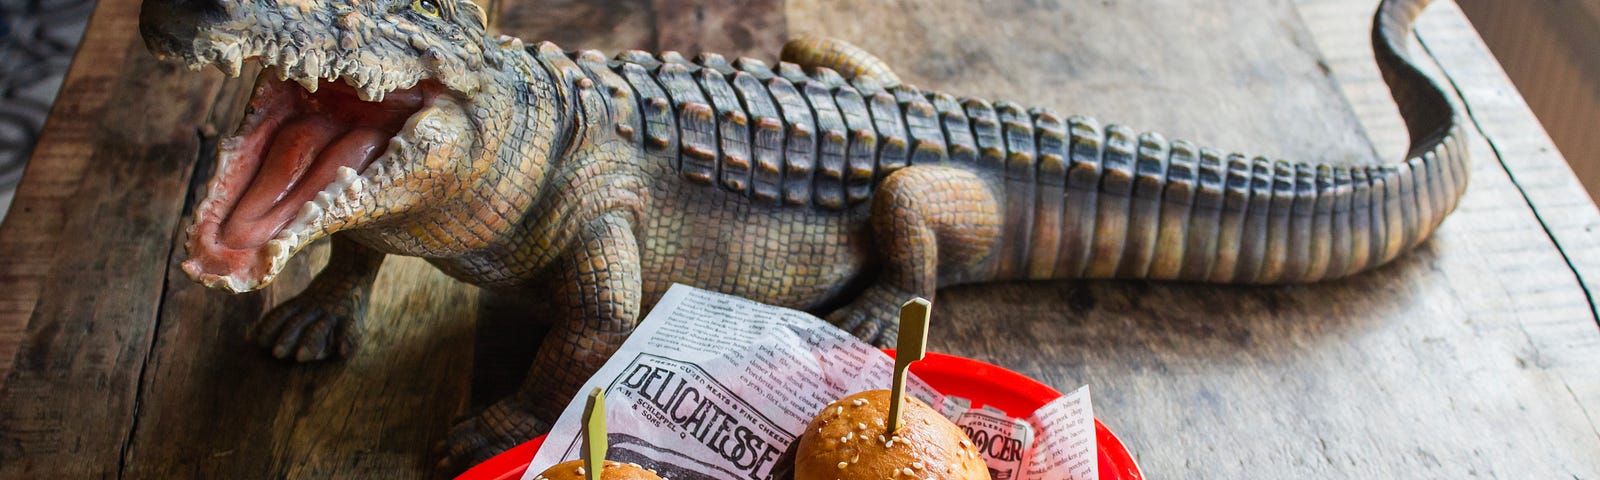 crocodile hovering around two burgers in a plastic serving dish